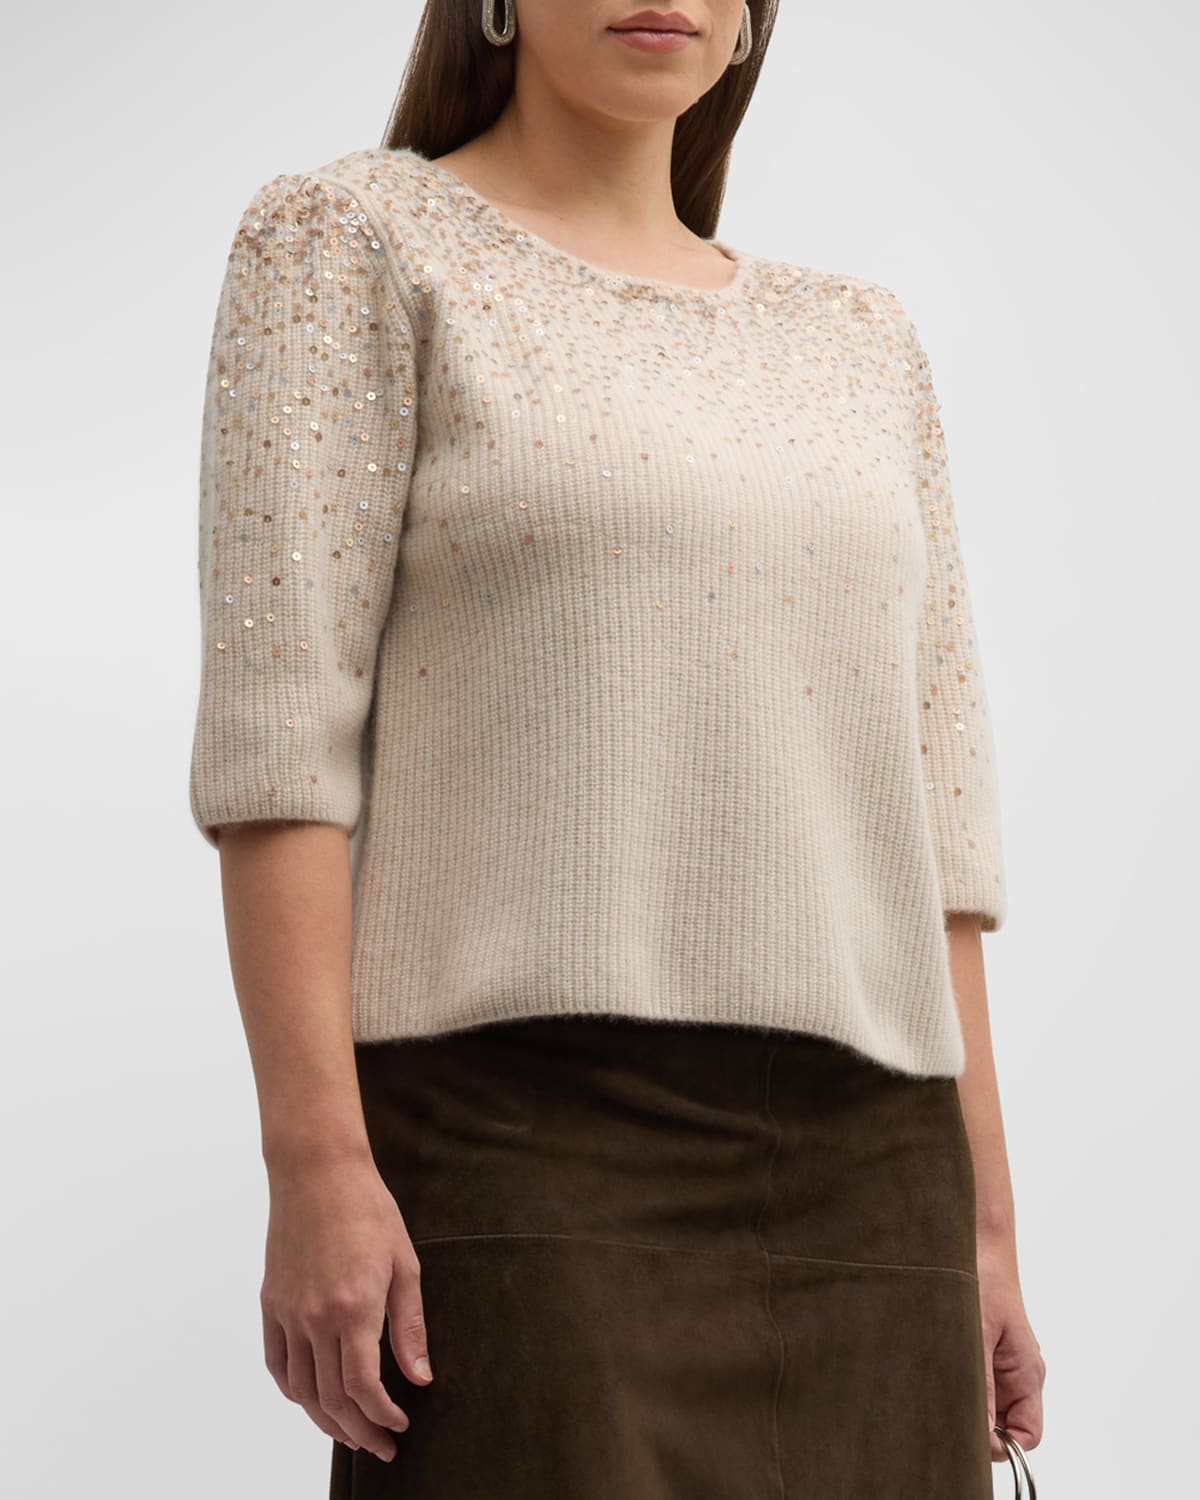 Plus Size Cashmere Pullover with Ombre Sequin Details